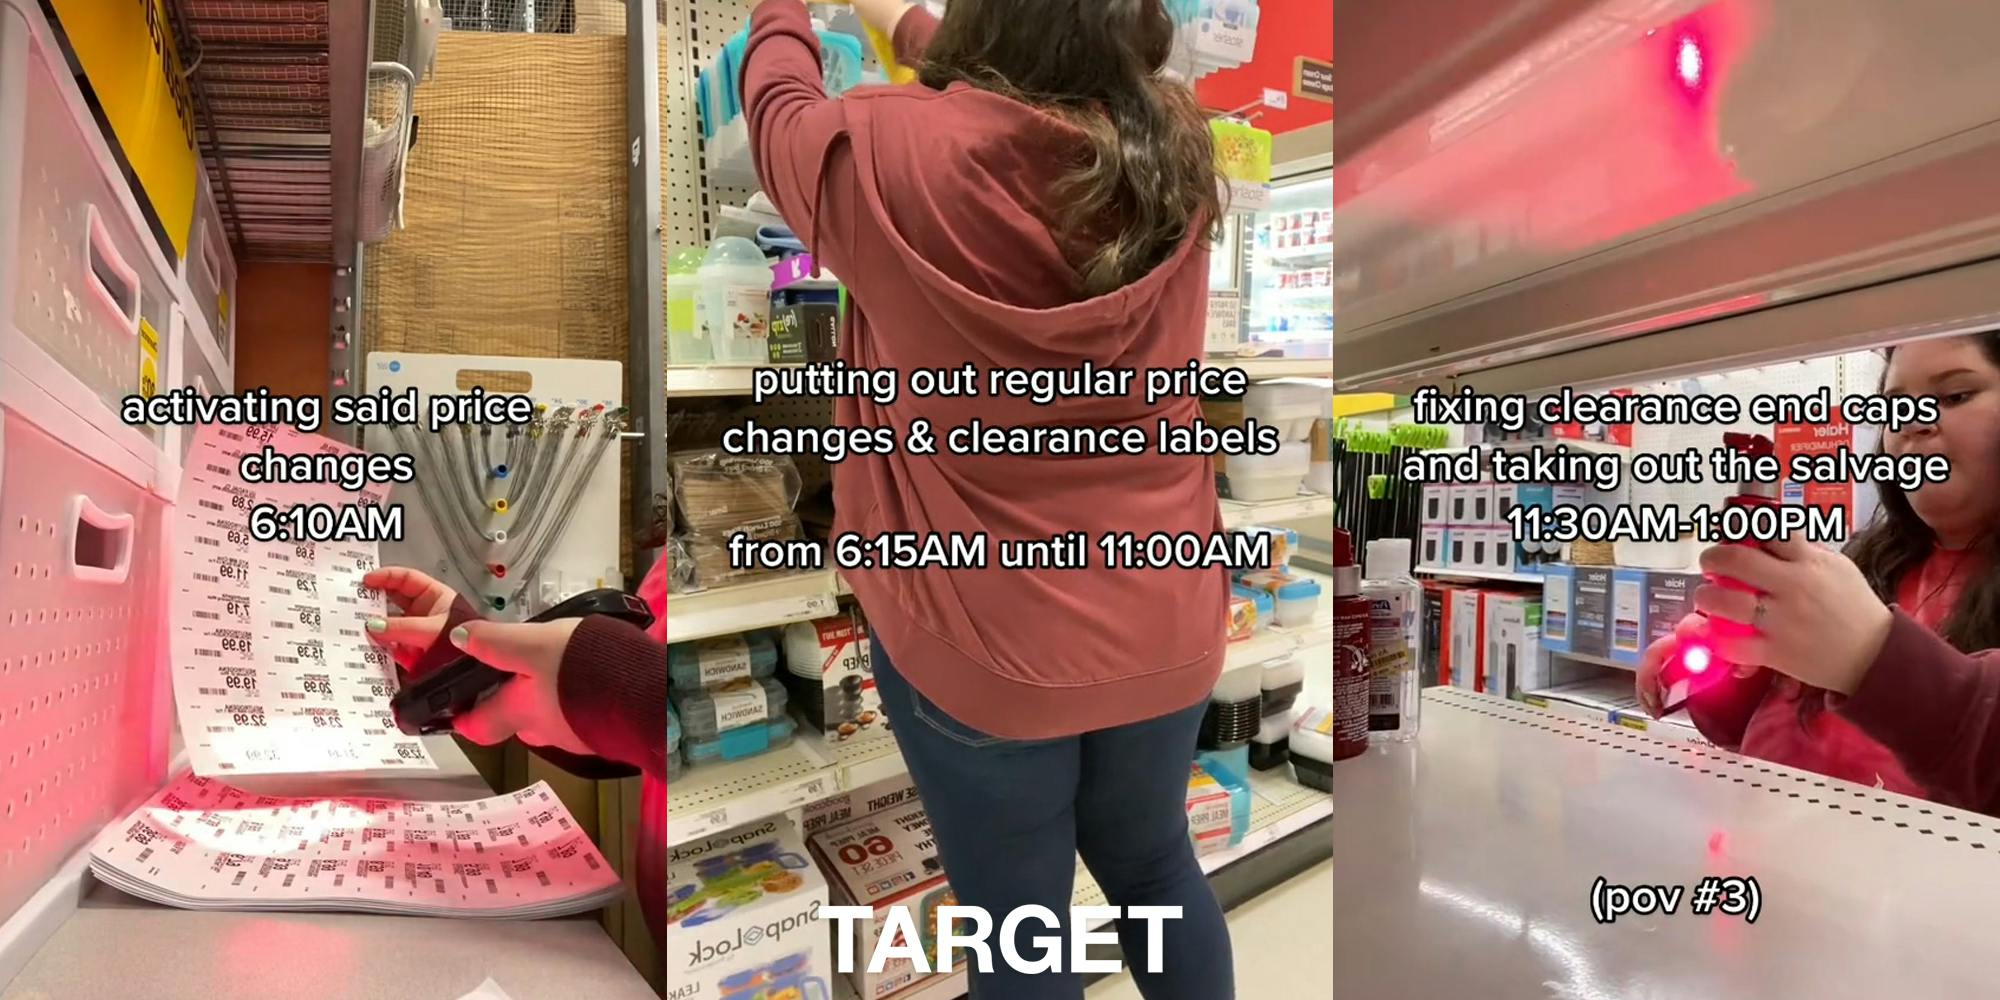 Target employee using scanner on price changes on paper with caption "activating said price changes 6:10AM" (l) Target employee putting out price change labels with caption "putting out regular price changes & clearance labels from 6:15AM until 11:00AM" with Target logo at the bottom (c) Target employee fixing clearance section with caption "fixing clearance end caps and taking out the salvage 11:30AM-1:00PM" (r)